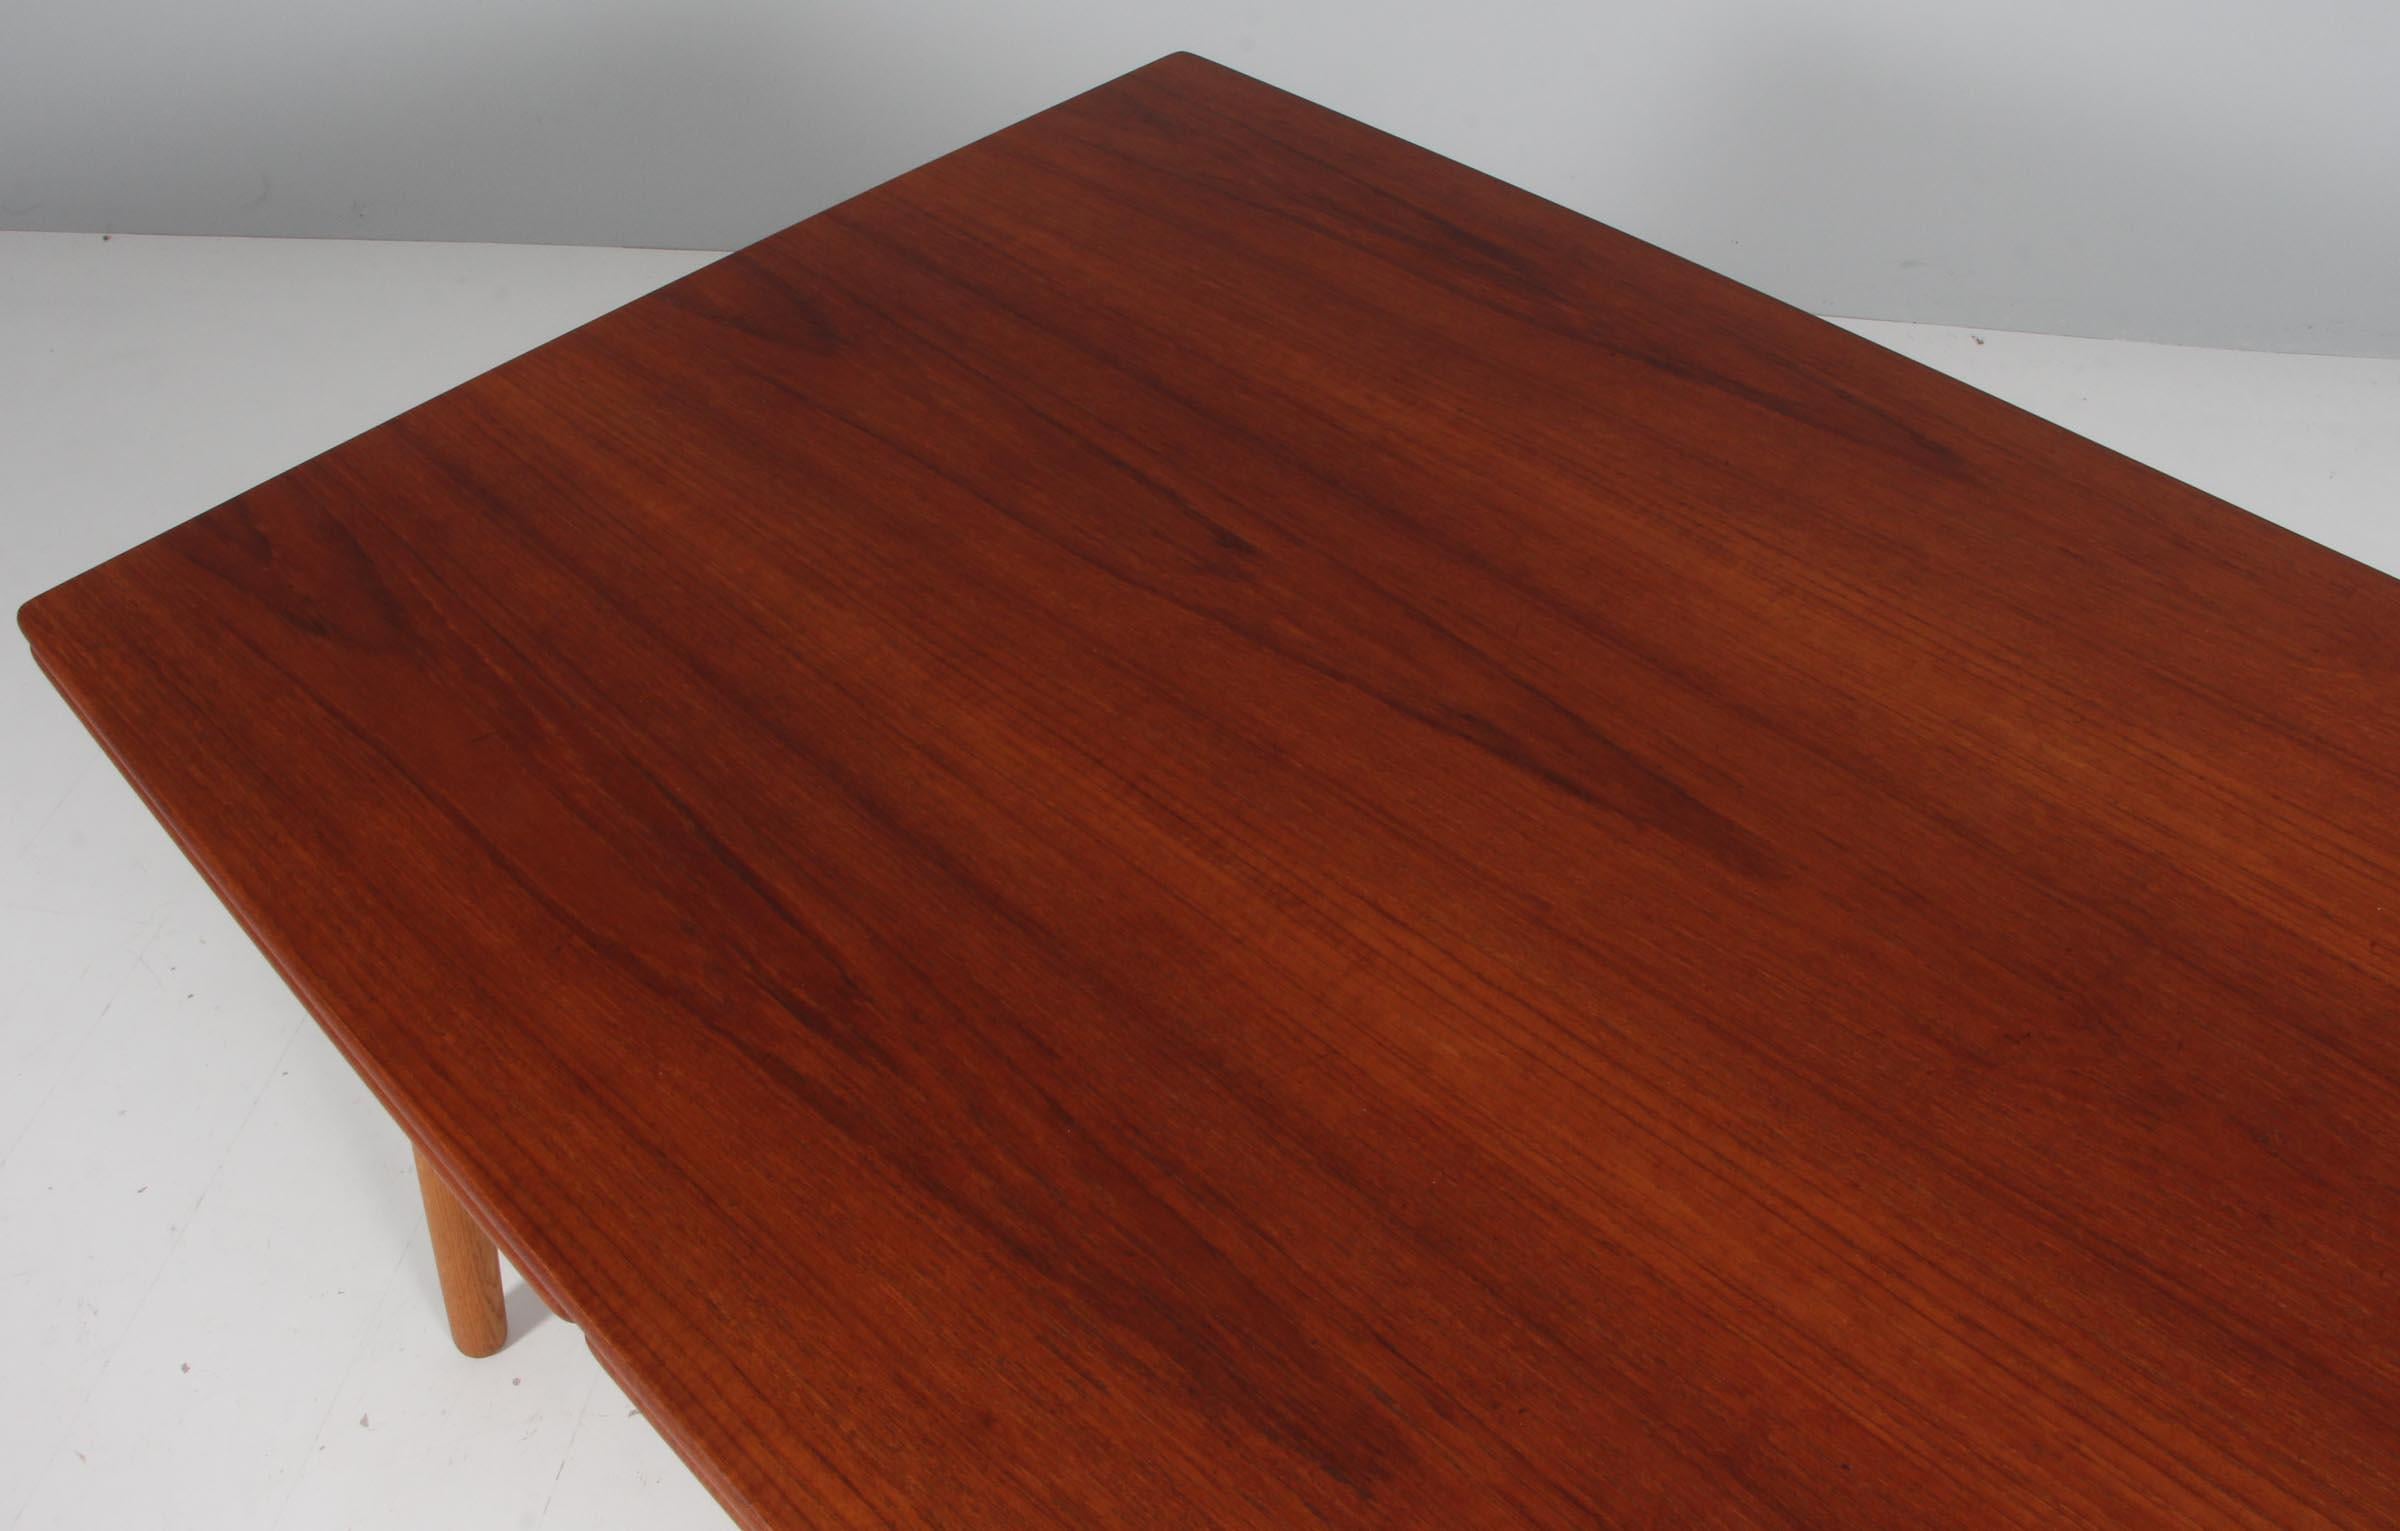 Scandinavian Modern Poul Volther for FDB dining table in teak and oak, extension leafes. For Sale